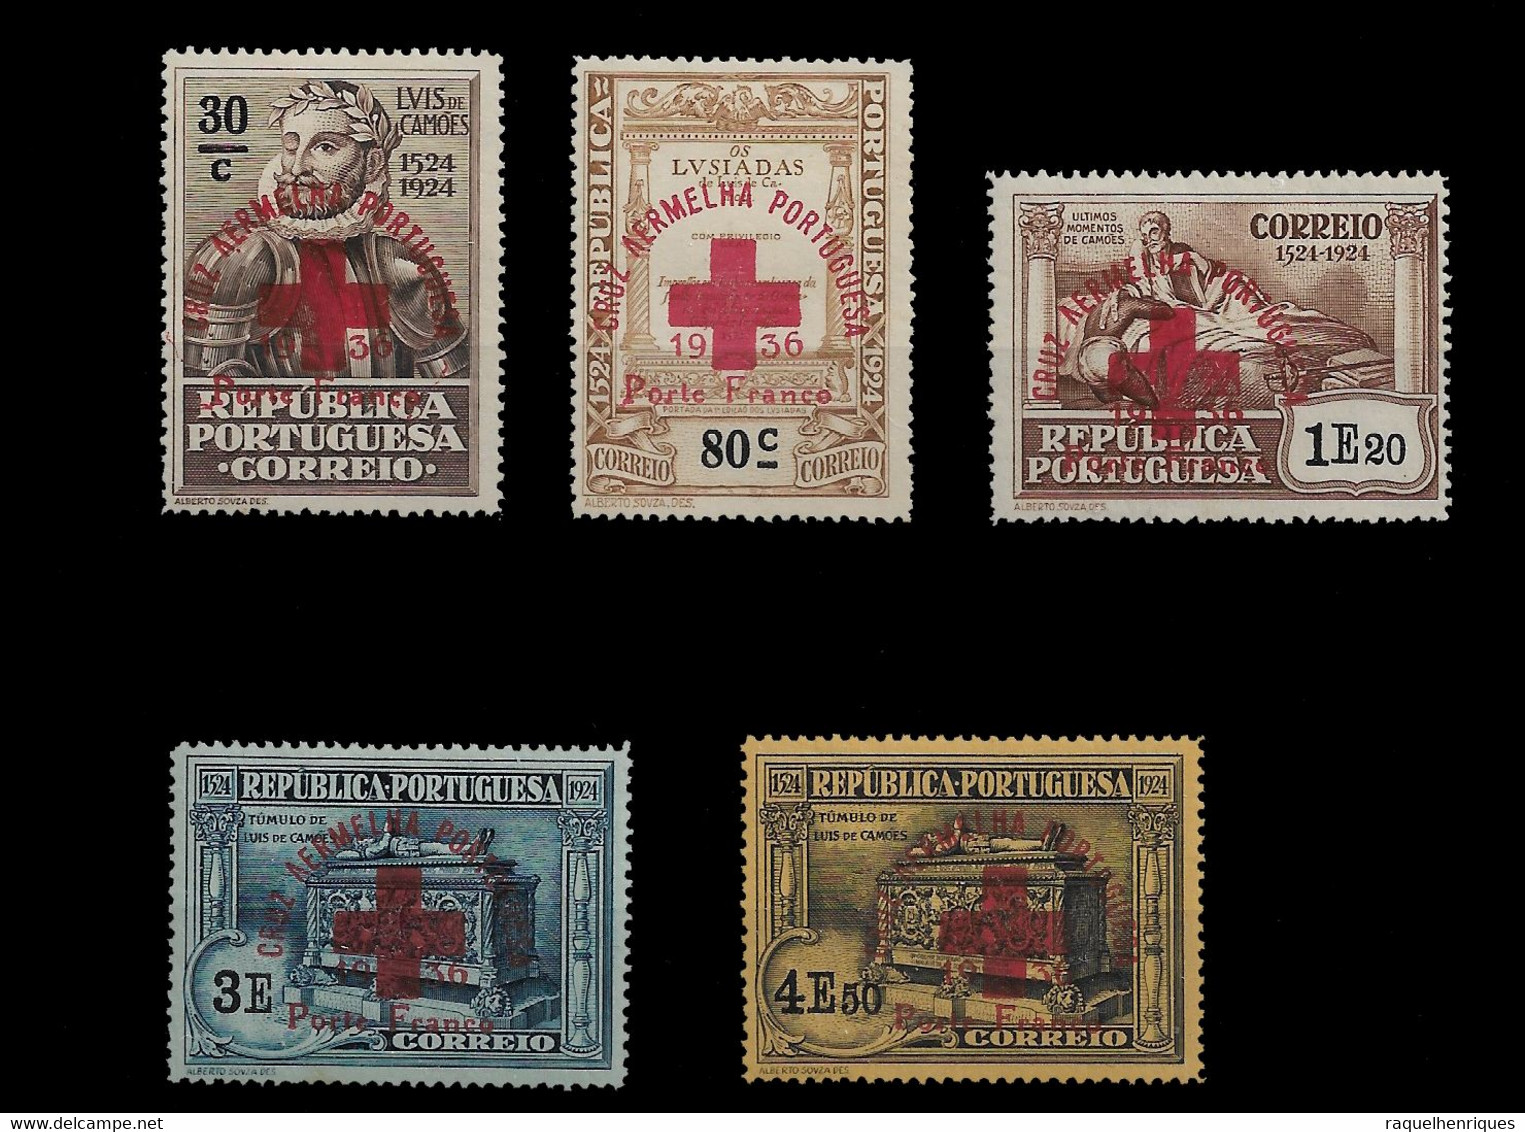 PORTUGAL PORTE FRANCO - 1936 SET SURCHARGED MH (PLB#01-141) - Unused Stamps